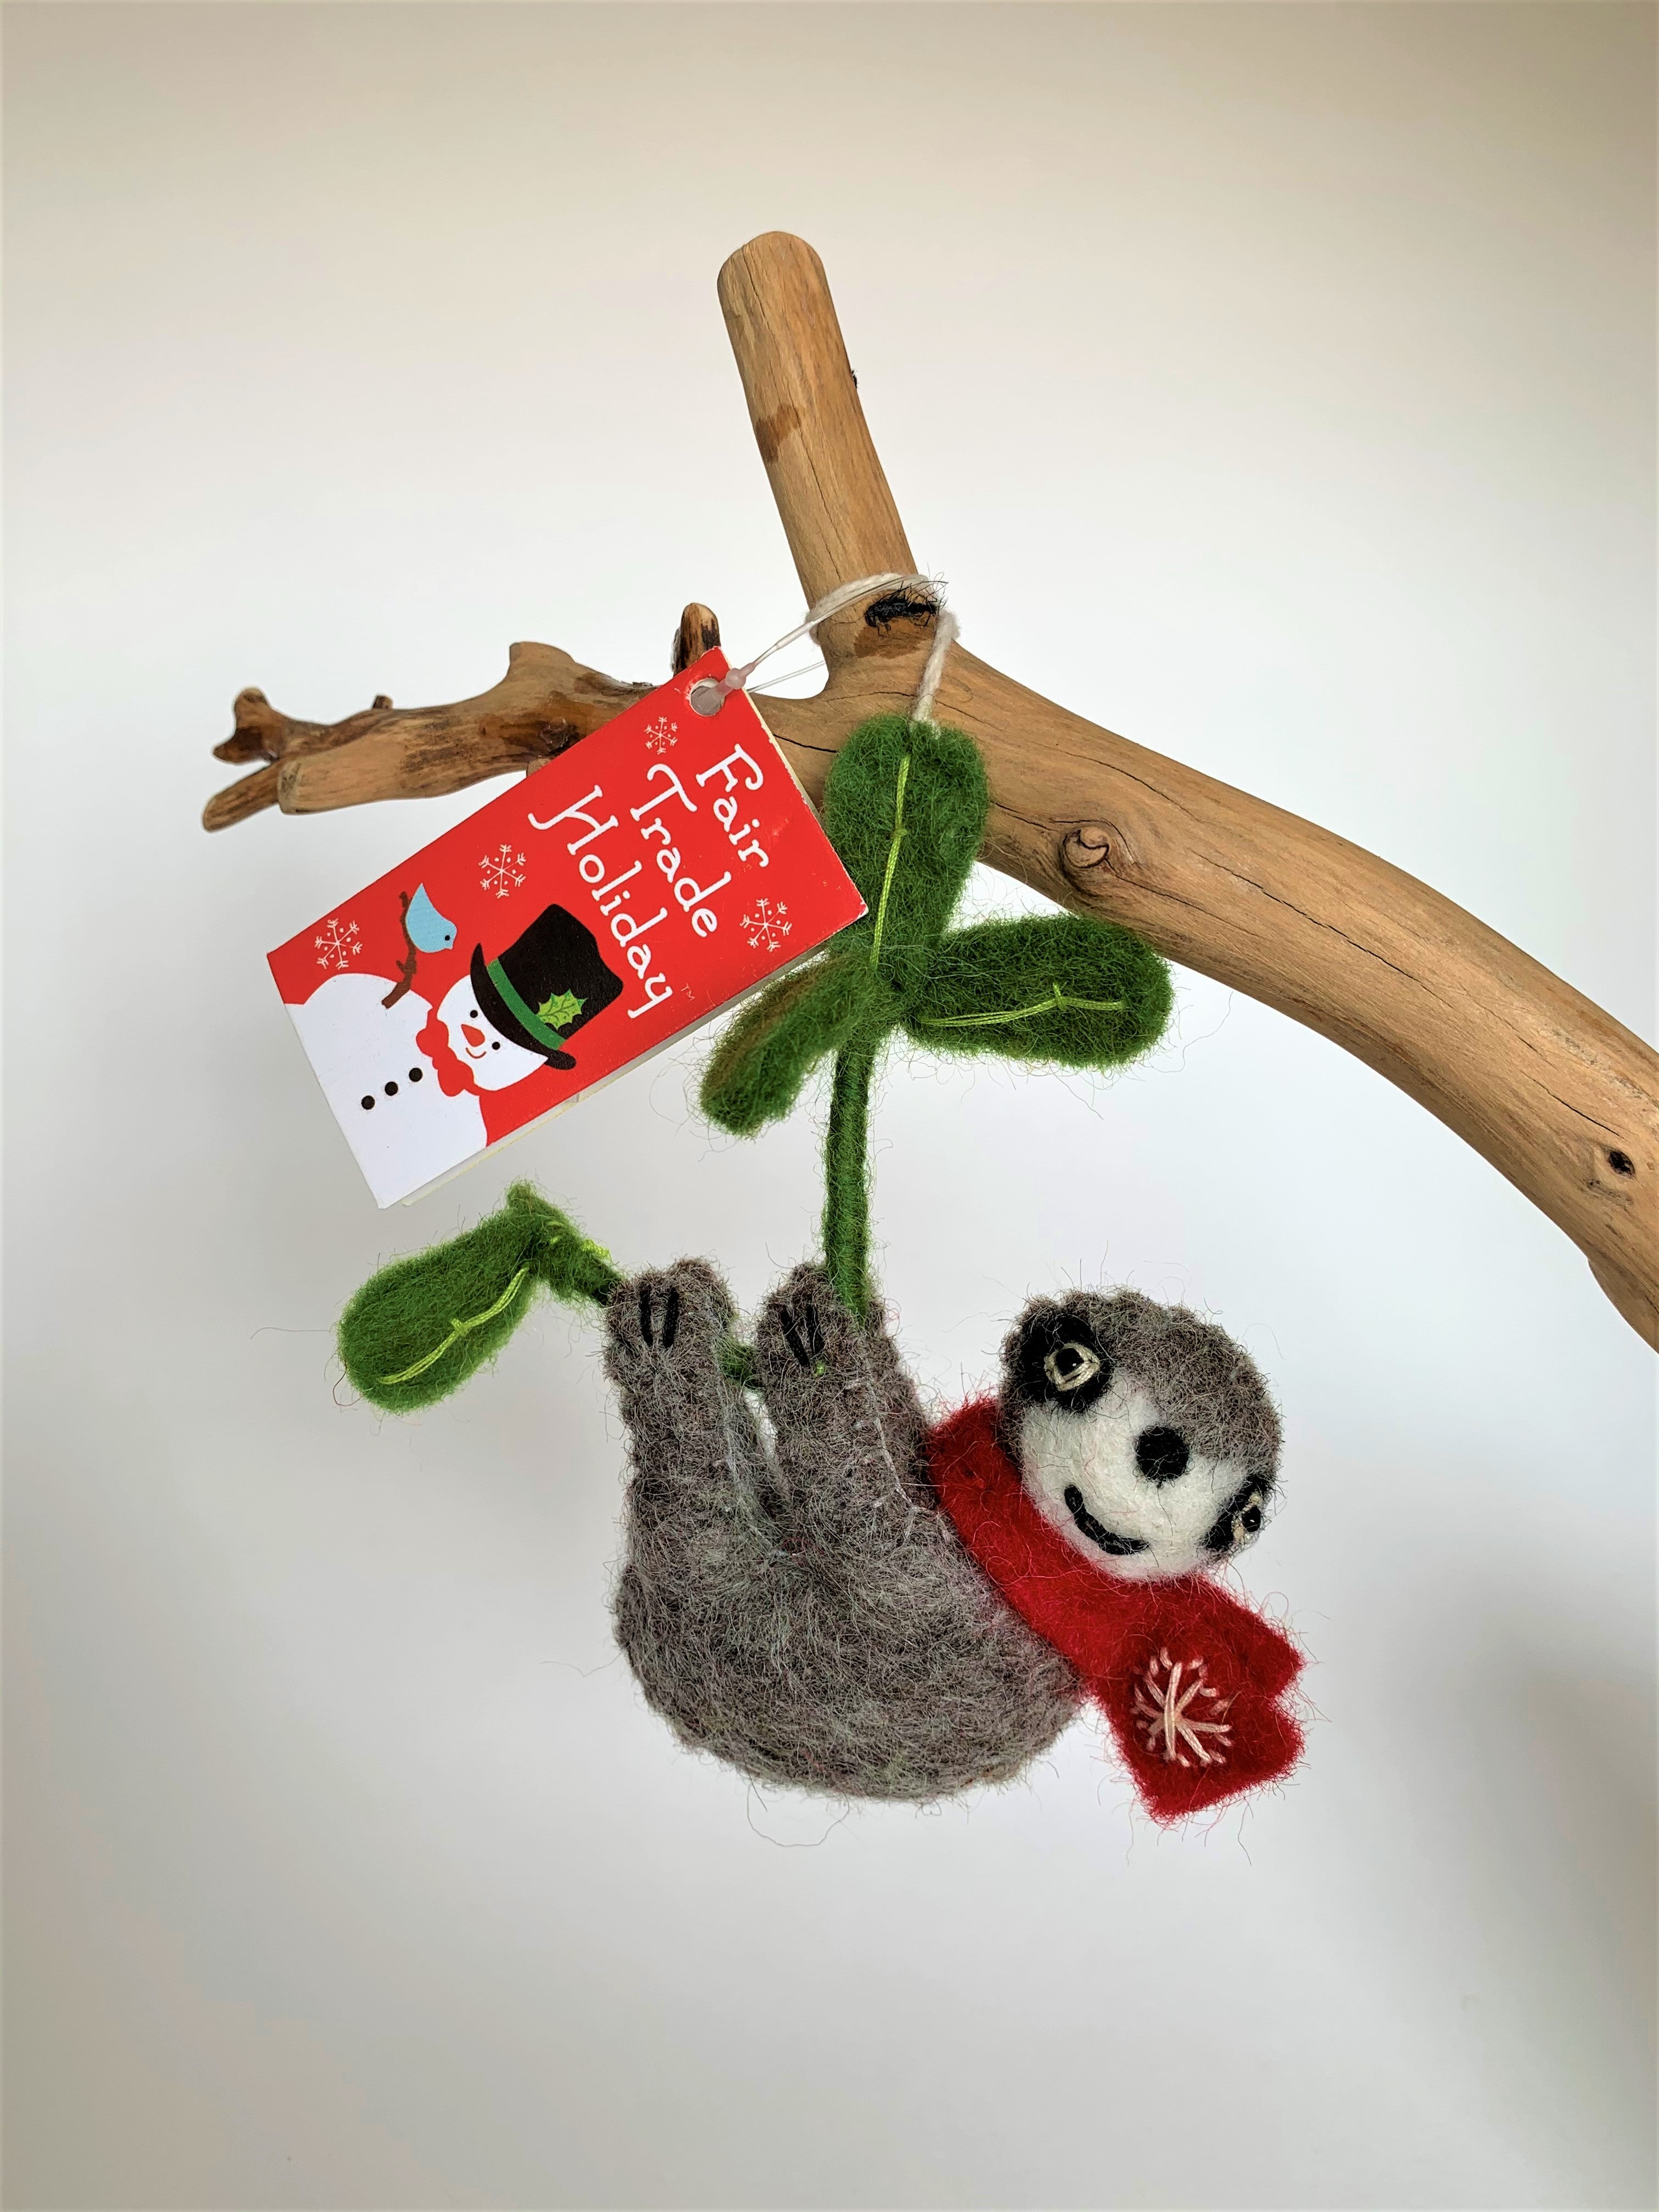 This view of the sloth Christmas ornament, hanging on a tree branch, is hand-crafted (fair trade) and made of 100% natural wool. It is brownish-gray with an off-white face, with black accents (nose, mouth, etc) and is wearing a red winter scarf with the 'signature' (white) snowflake on it. It is hanging from a green branch with green leaves. Approximately 4.75"x4.25". It comes with a detachable fair trade "to/from" tag to use if giving as a gift.